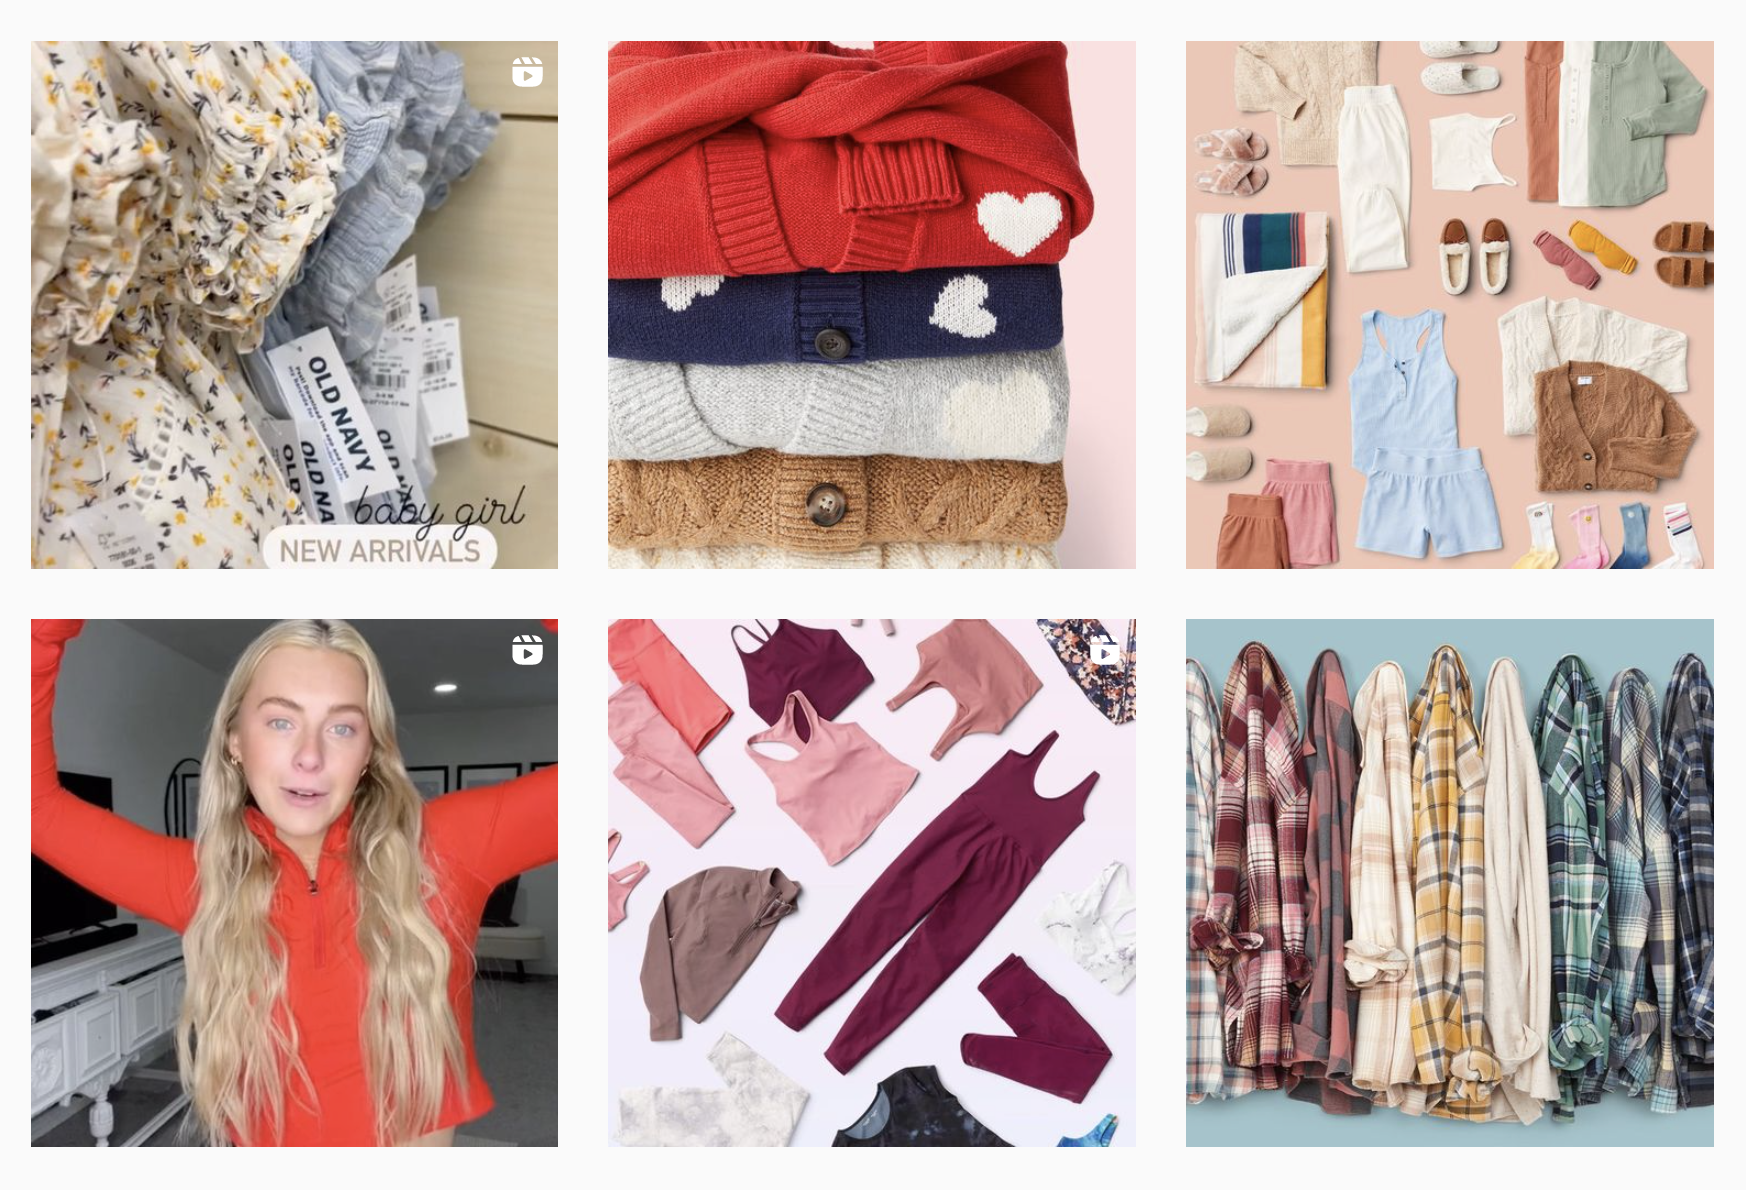 Old Navy (@oldnavy) • Instagram photos and videos